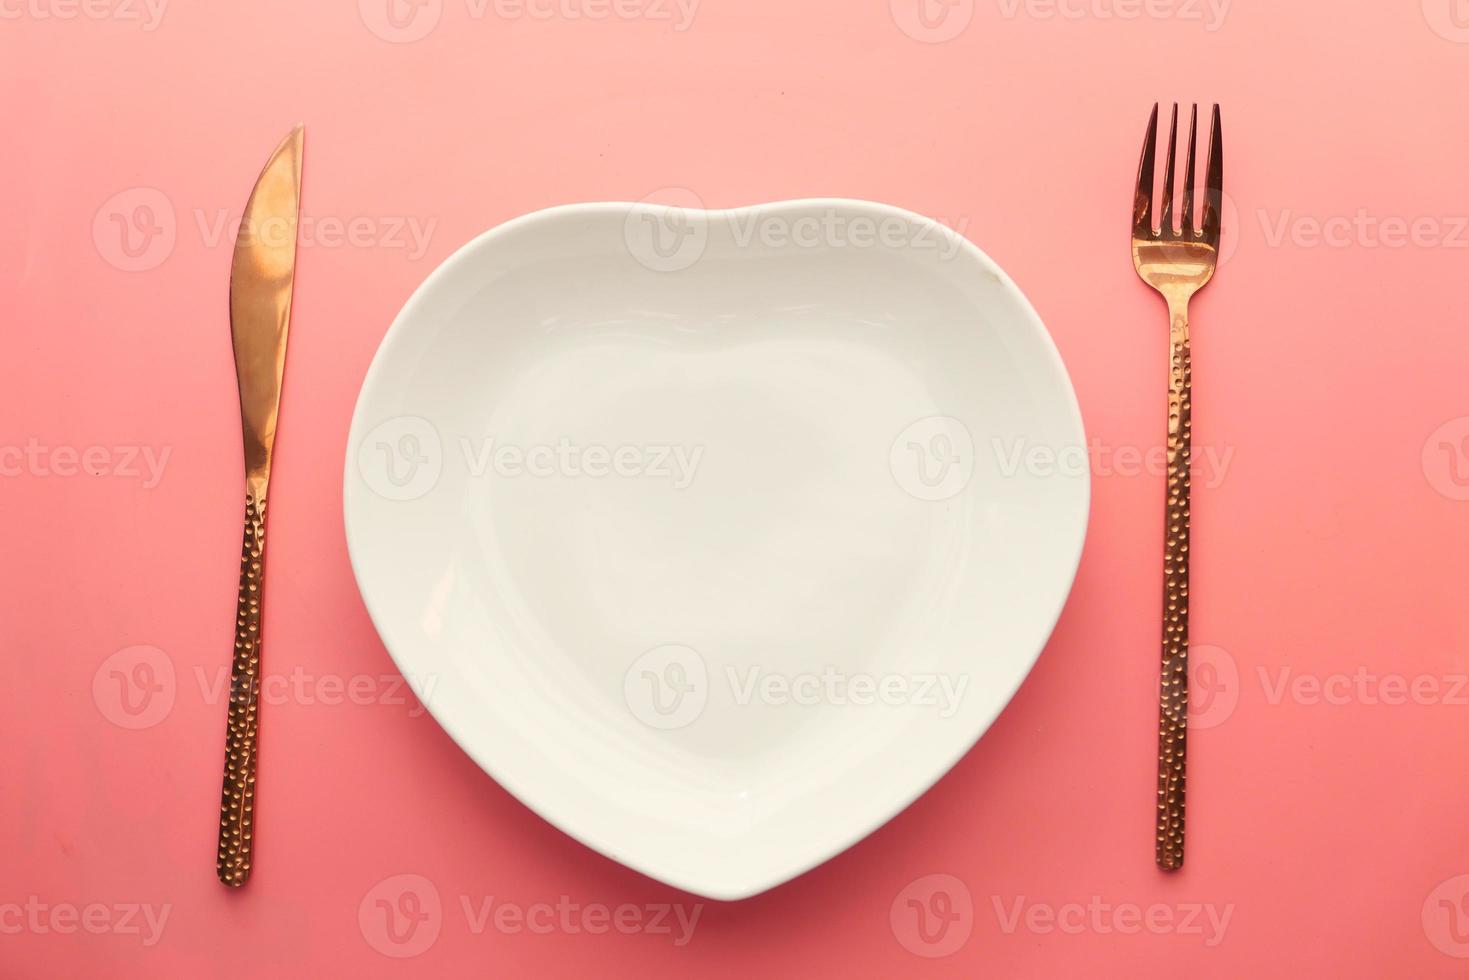 Heart shaped plate with gold cutlery photo